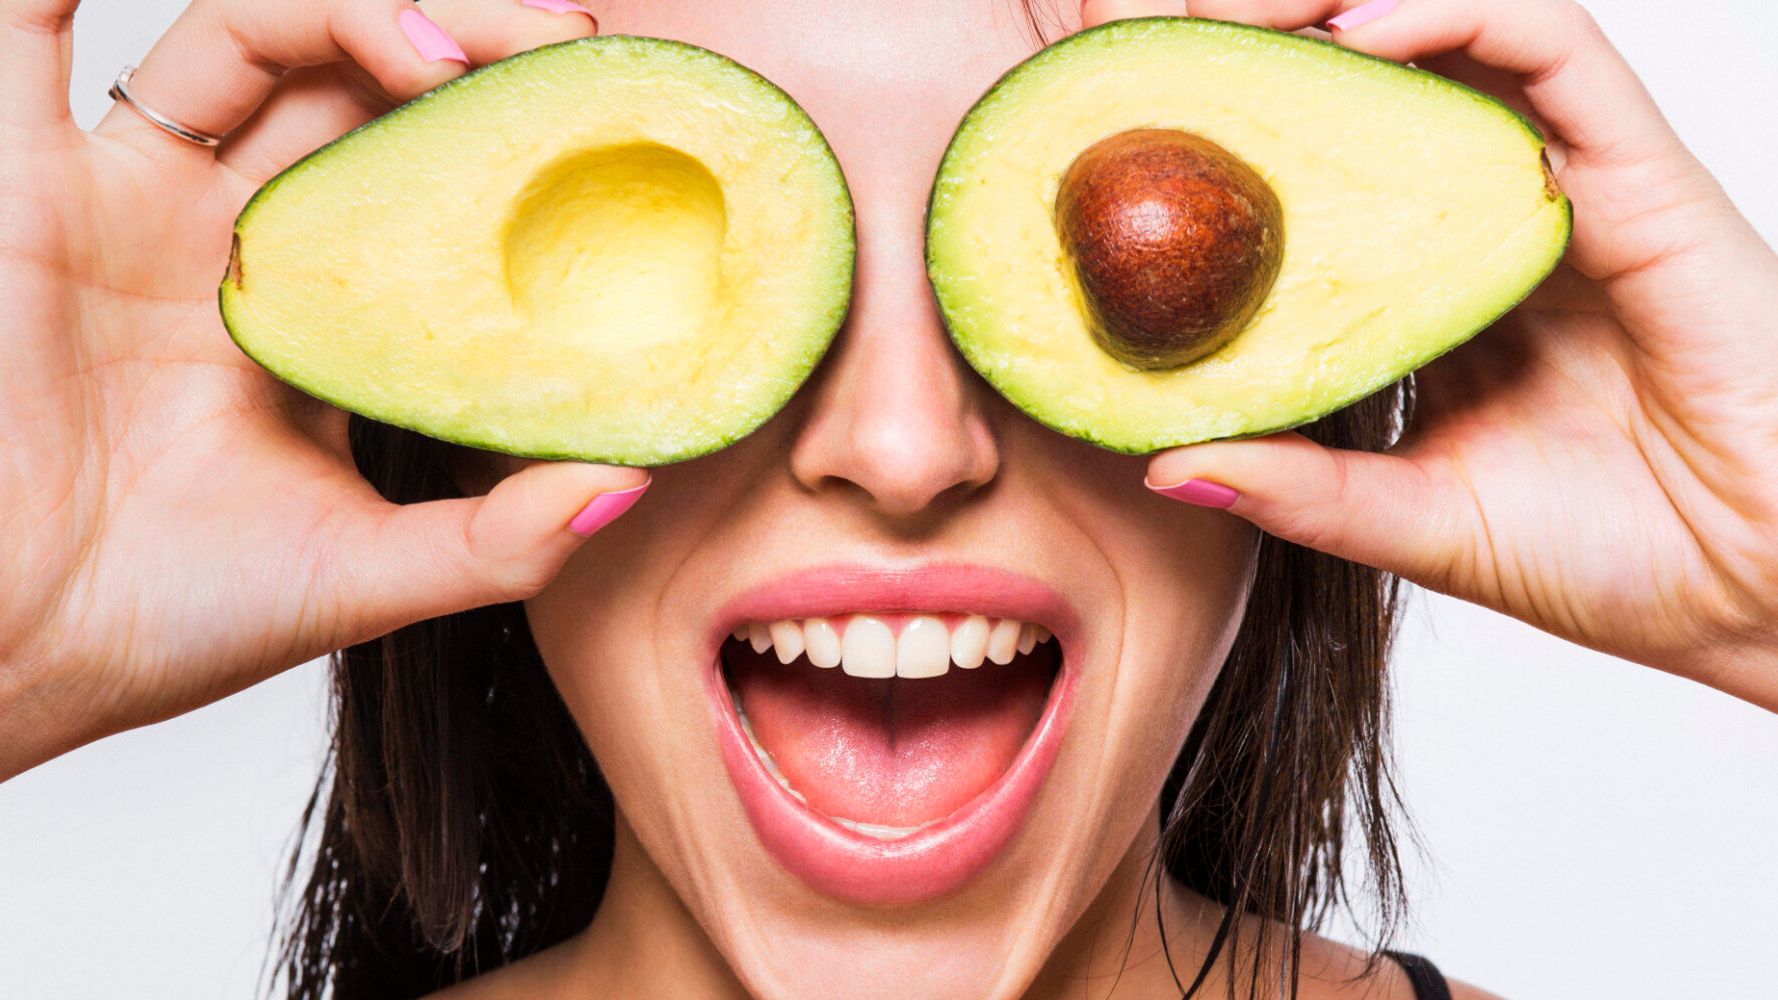 Eating One Avocado A Day Could Lower Your Cholesterol And Keep Your